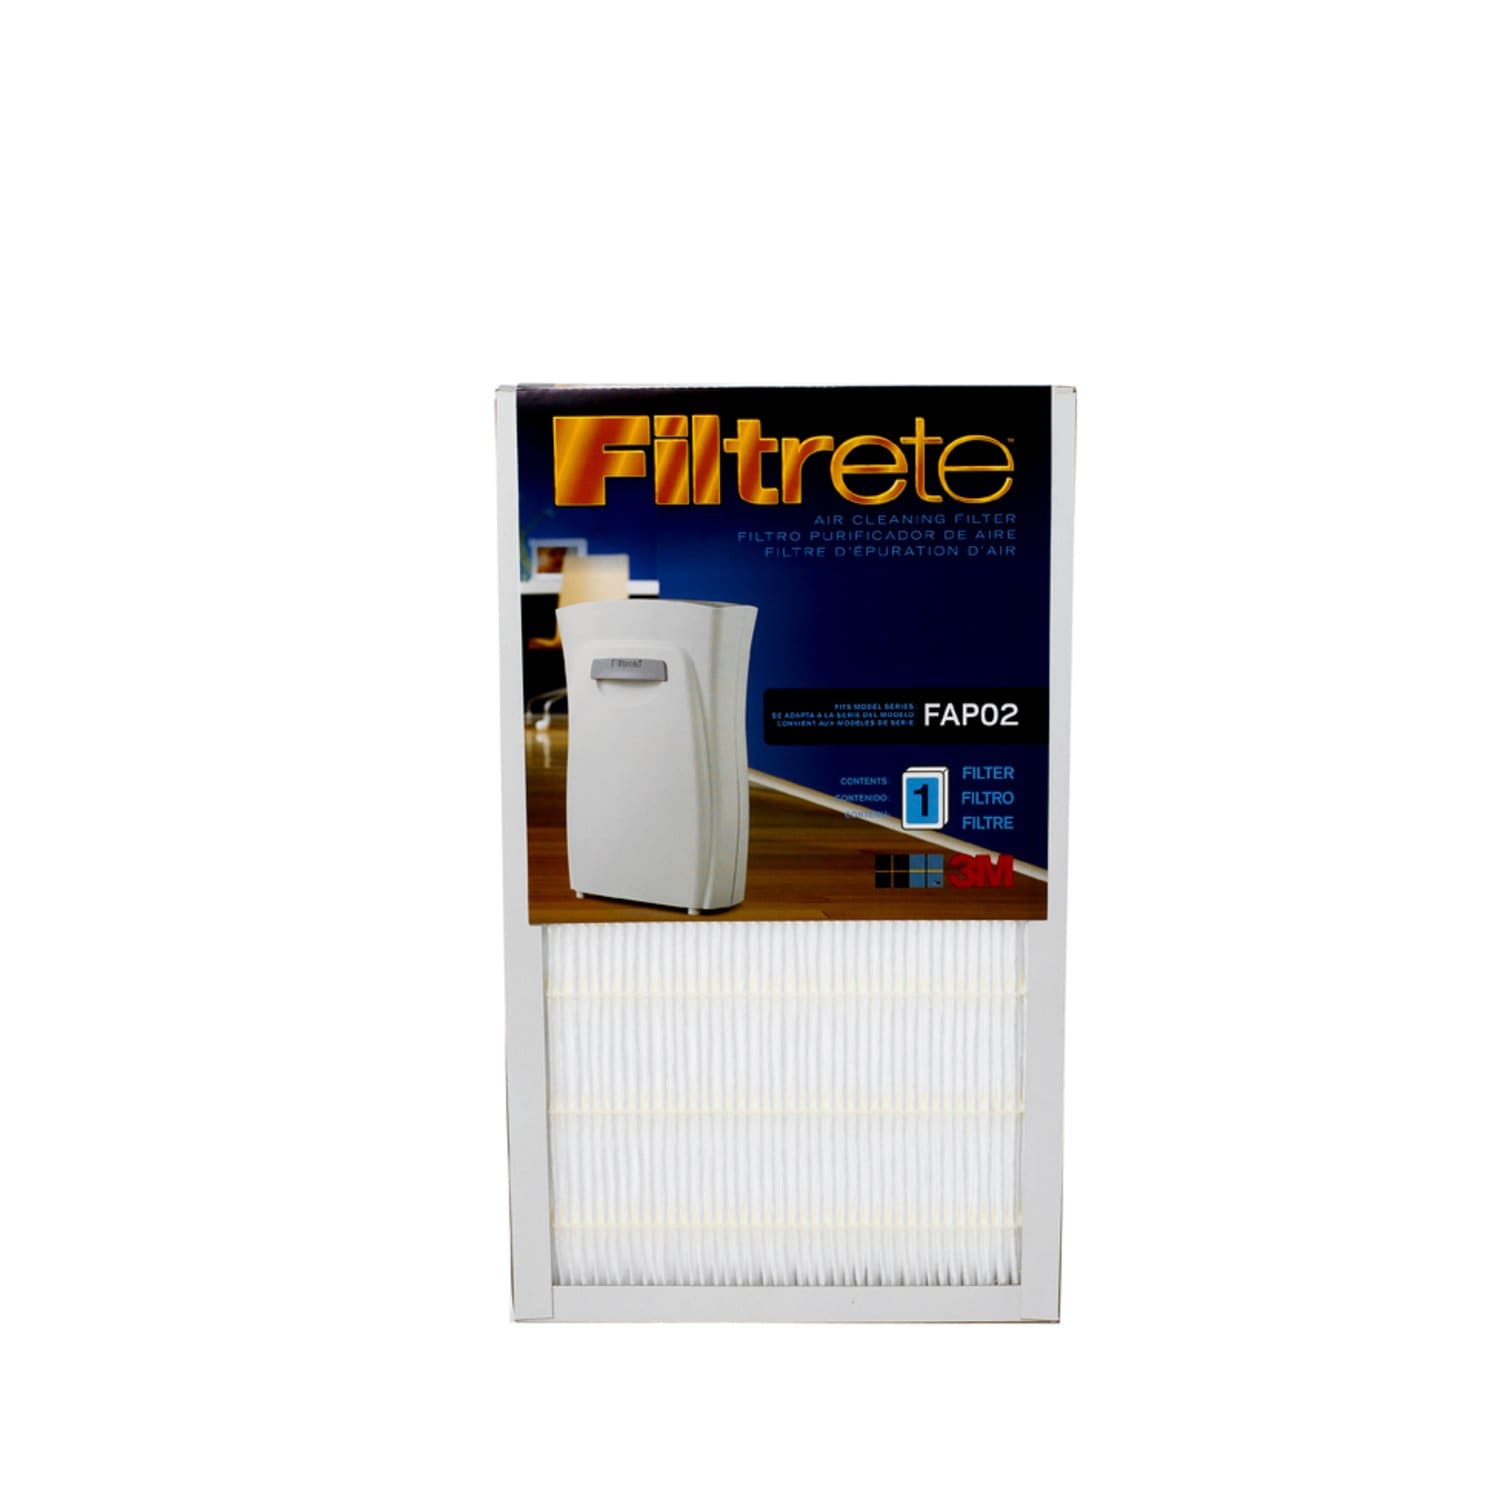 7000011079 - Filtrete Air Cleaning Filter FAPF02-4, 15 in x 9 in x .75 in (381mm x
228.6mm x 19.1mm), 480 pks/plt